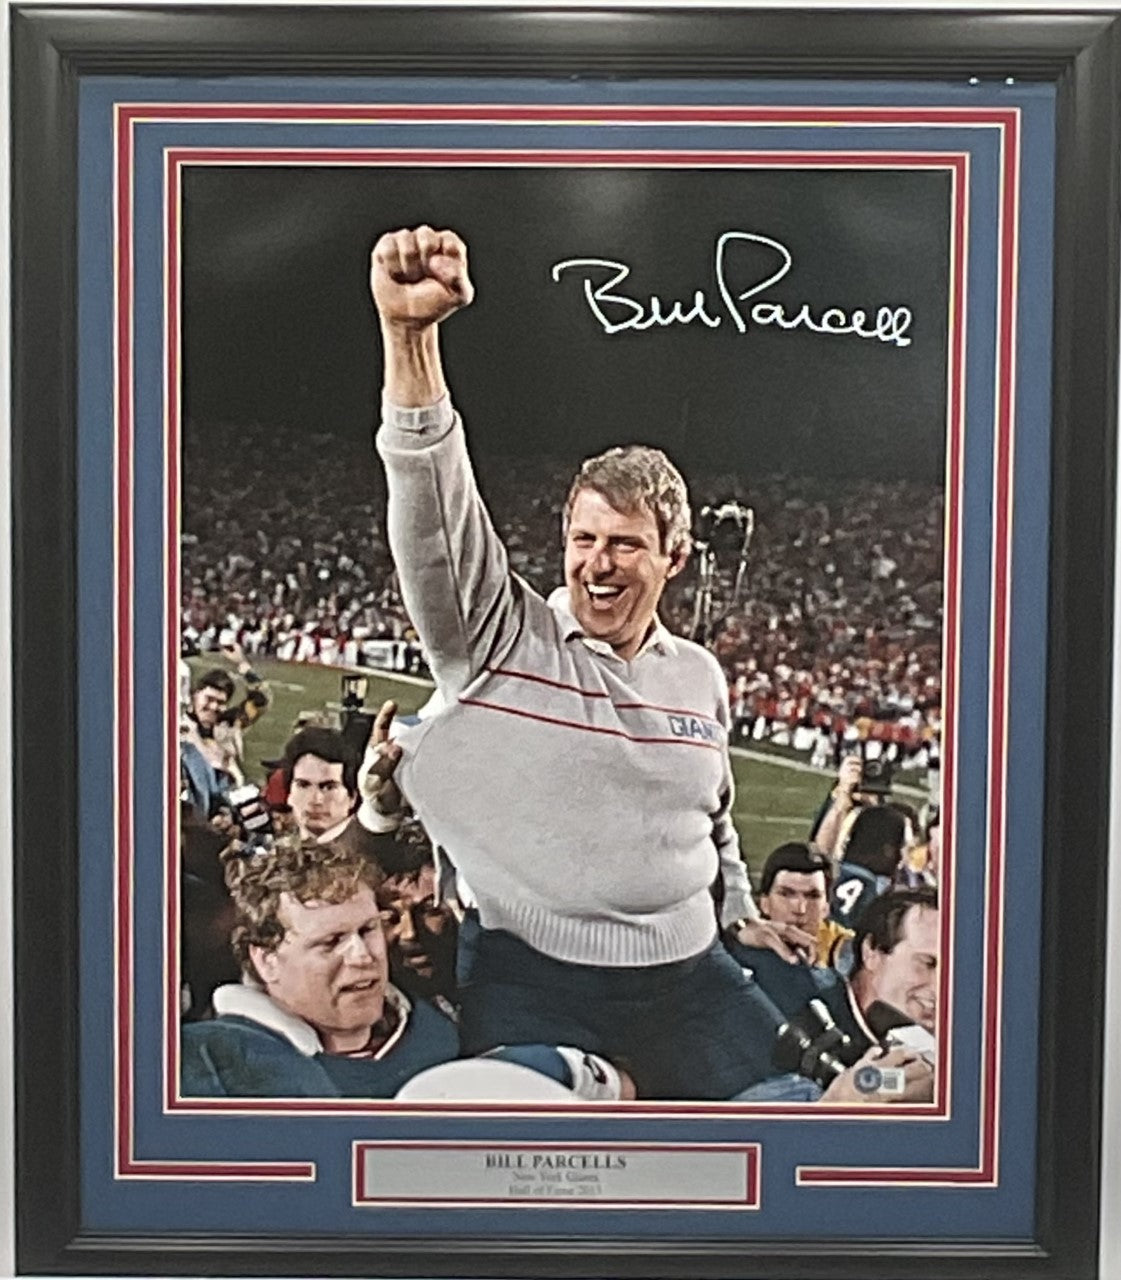 Bill Parcells New York Giants Autographed 16x20 Photo Framed